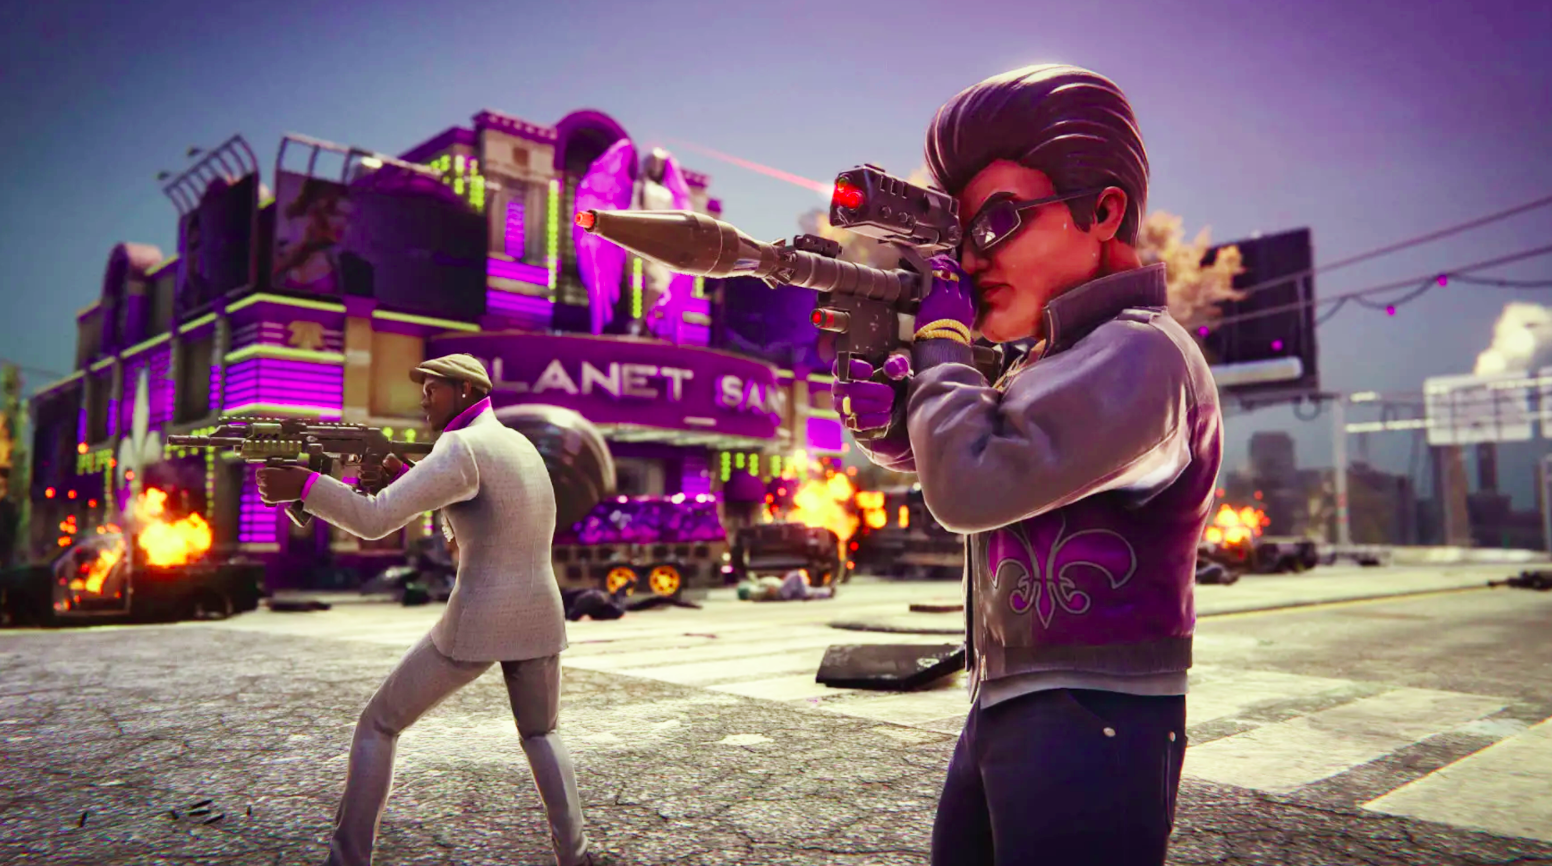 Saints Row Backlash Explained: Why This Reboot Is Already Getting So Much  Fan Hate